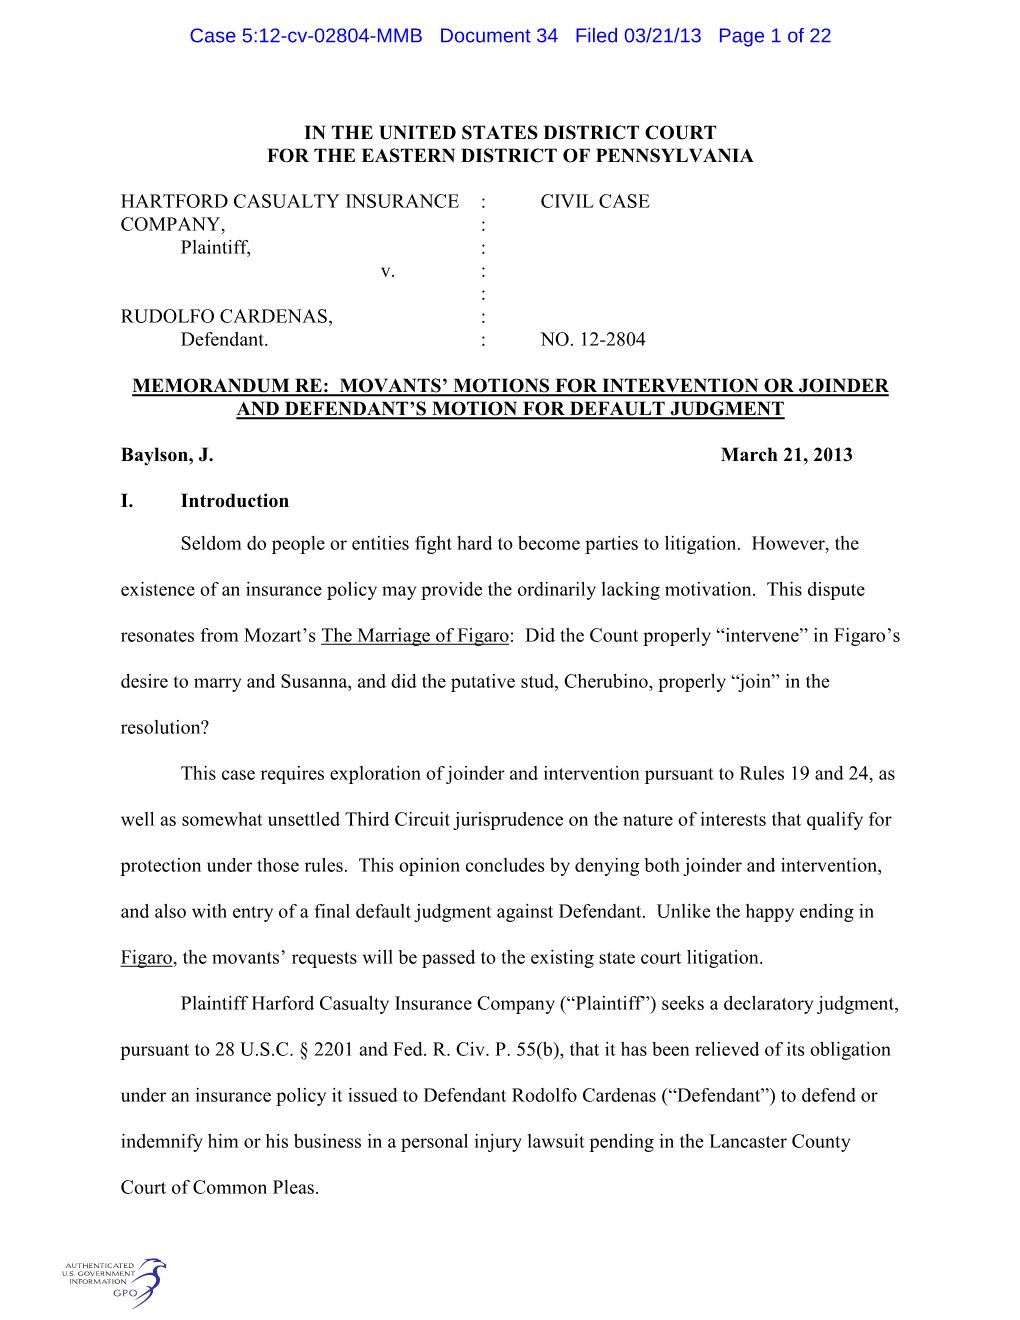 Case 5:12-Cv-02804-MMB Document 34 Filed 03/21/13 Page 1 of 22